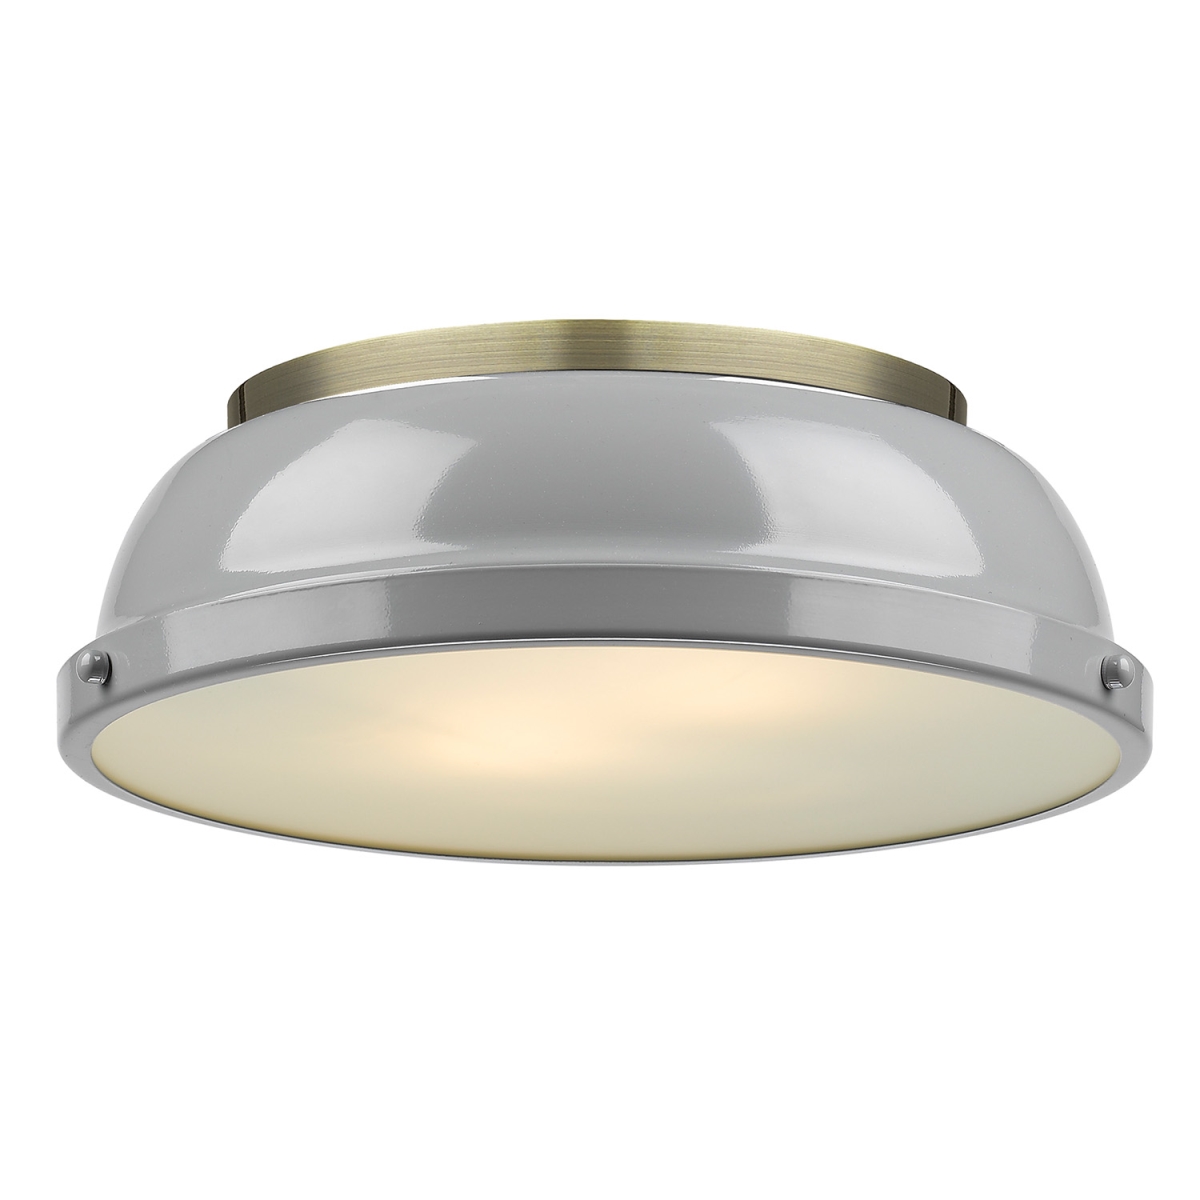 3602-14 Ab-gy Duncan 14 In. Flush Mount Light With Gray Shade, Aged Brass